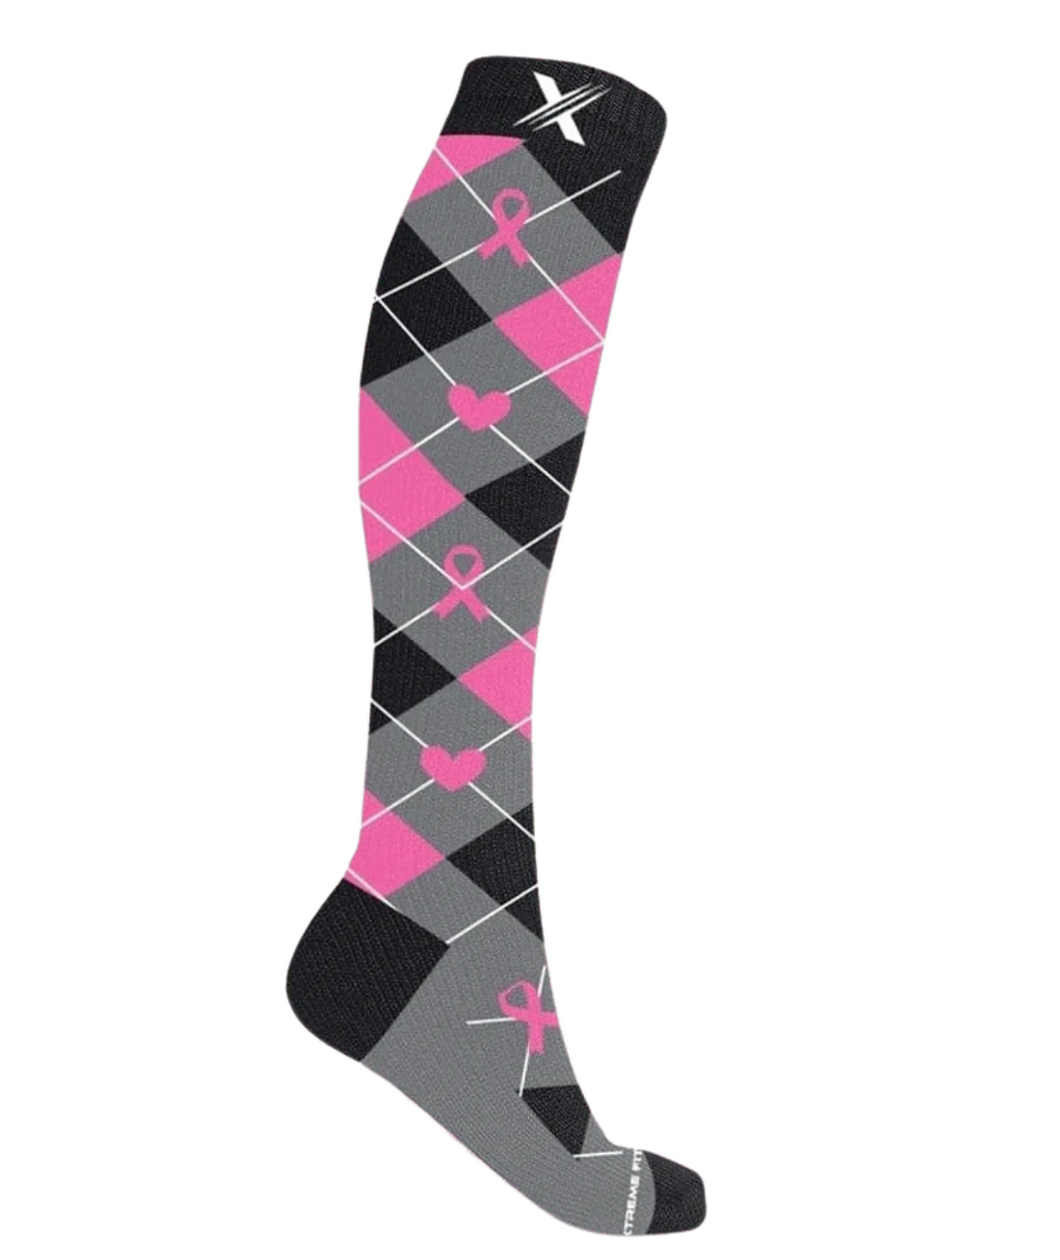 Breast Cancer Awareness Compression Socks (1 pair)